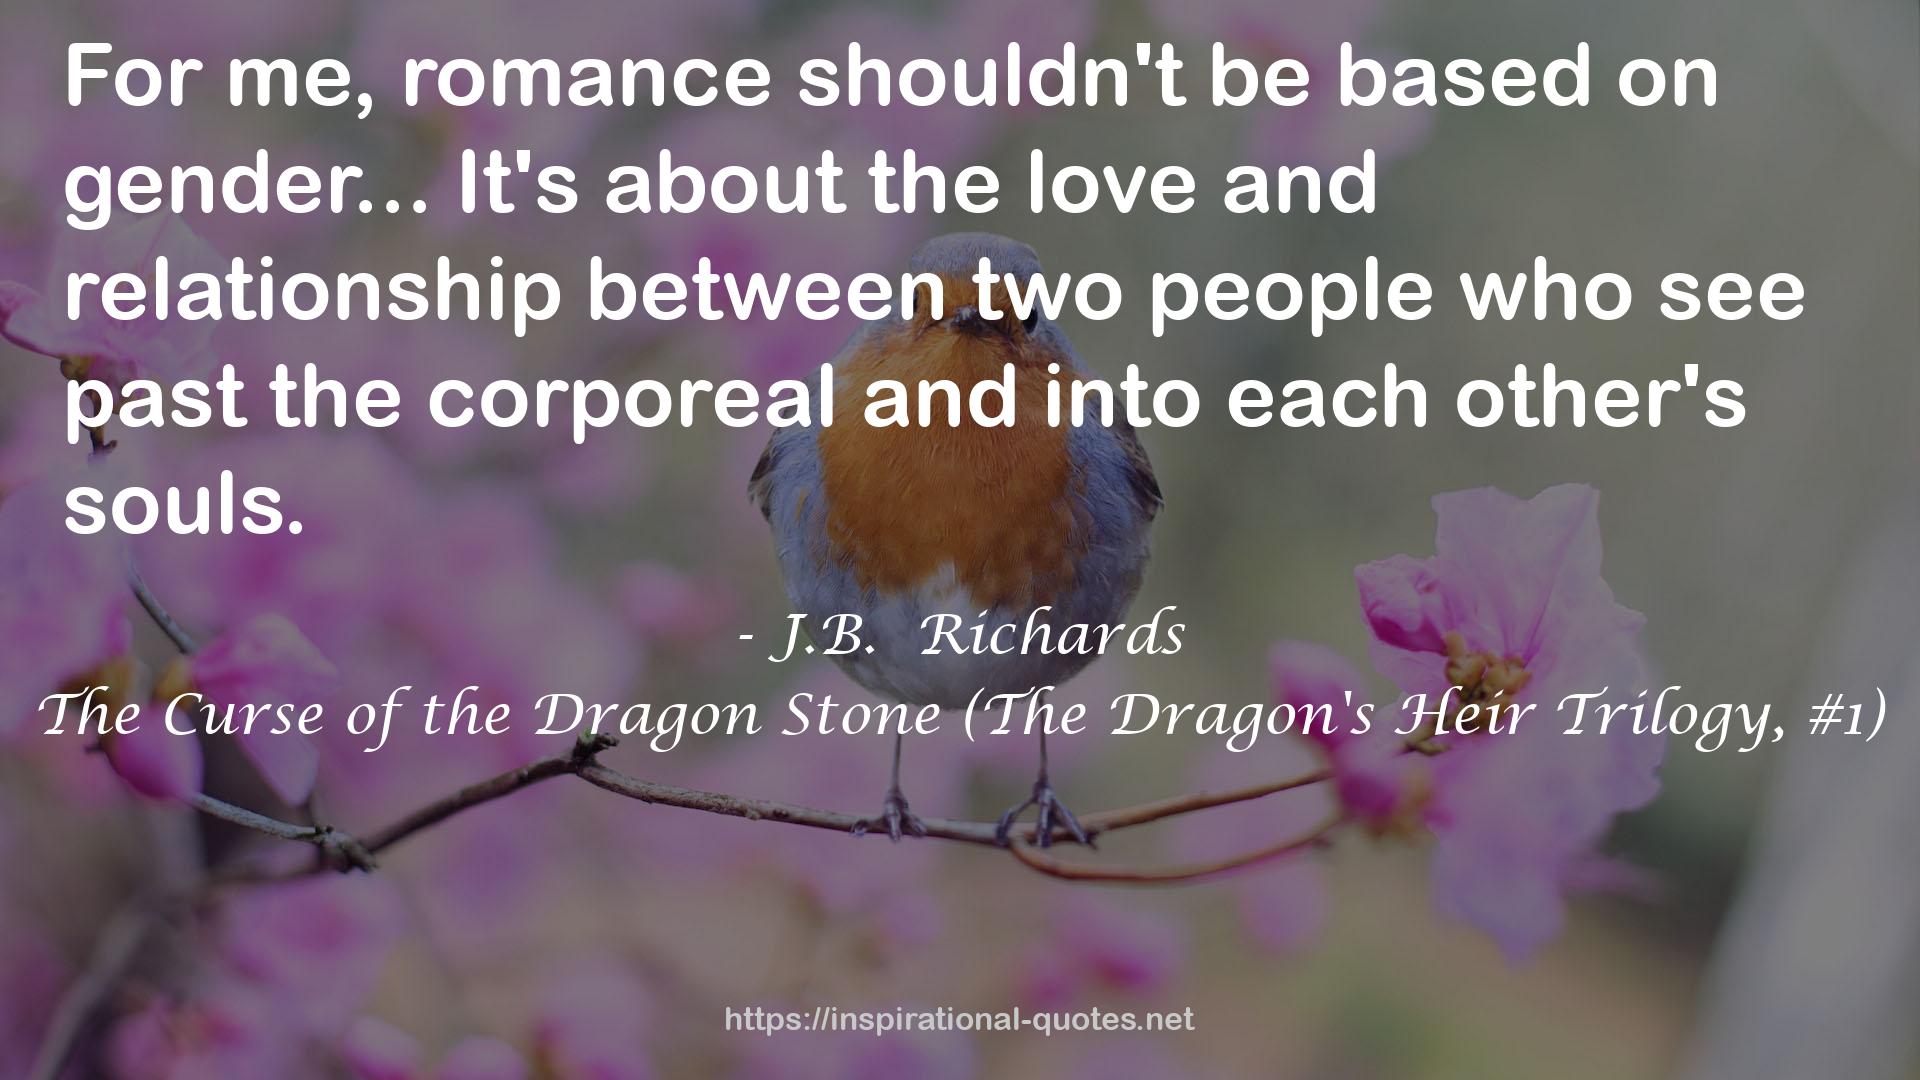 The Curse of the Dragon Stone (The Dragon's Heir Trilogy, #1) QUOTES